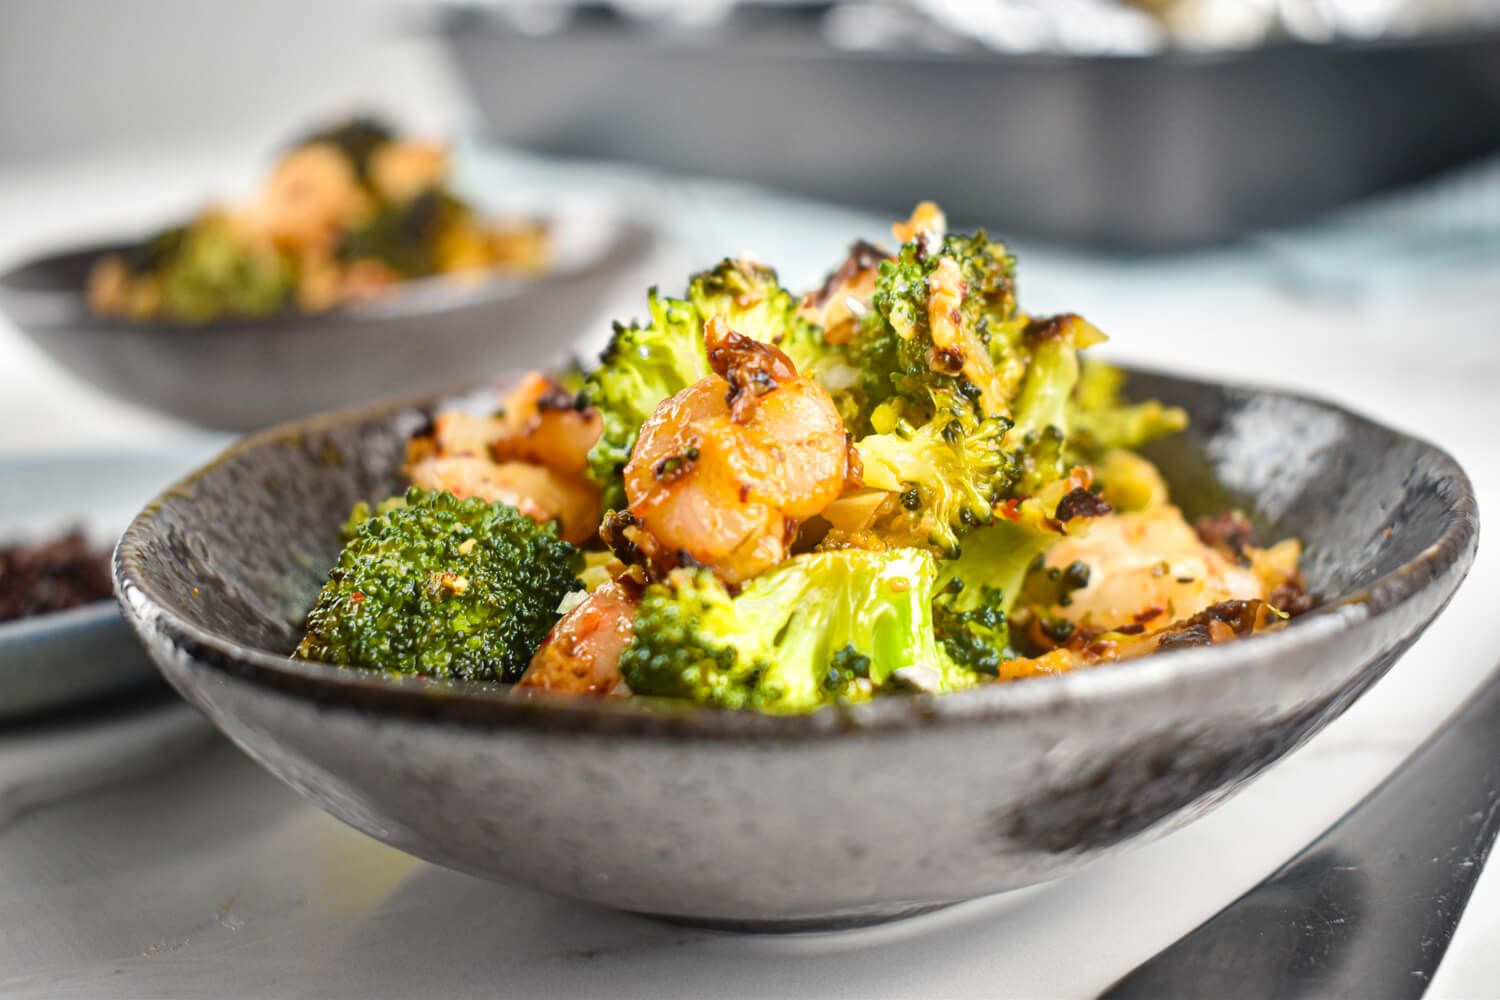 Garlic parmesan shrimp and brocoli in a gray bowl with sprinkled cheese on top.